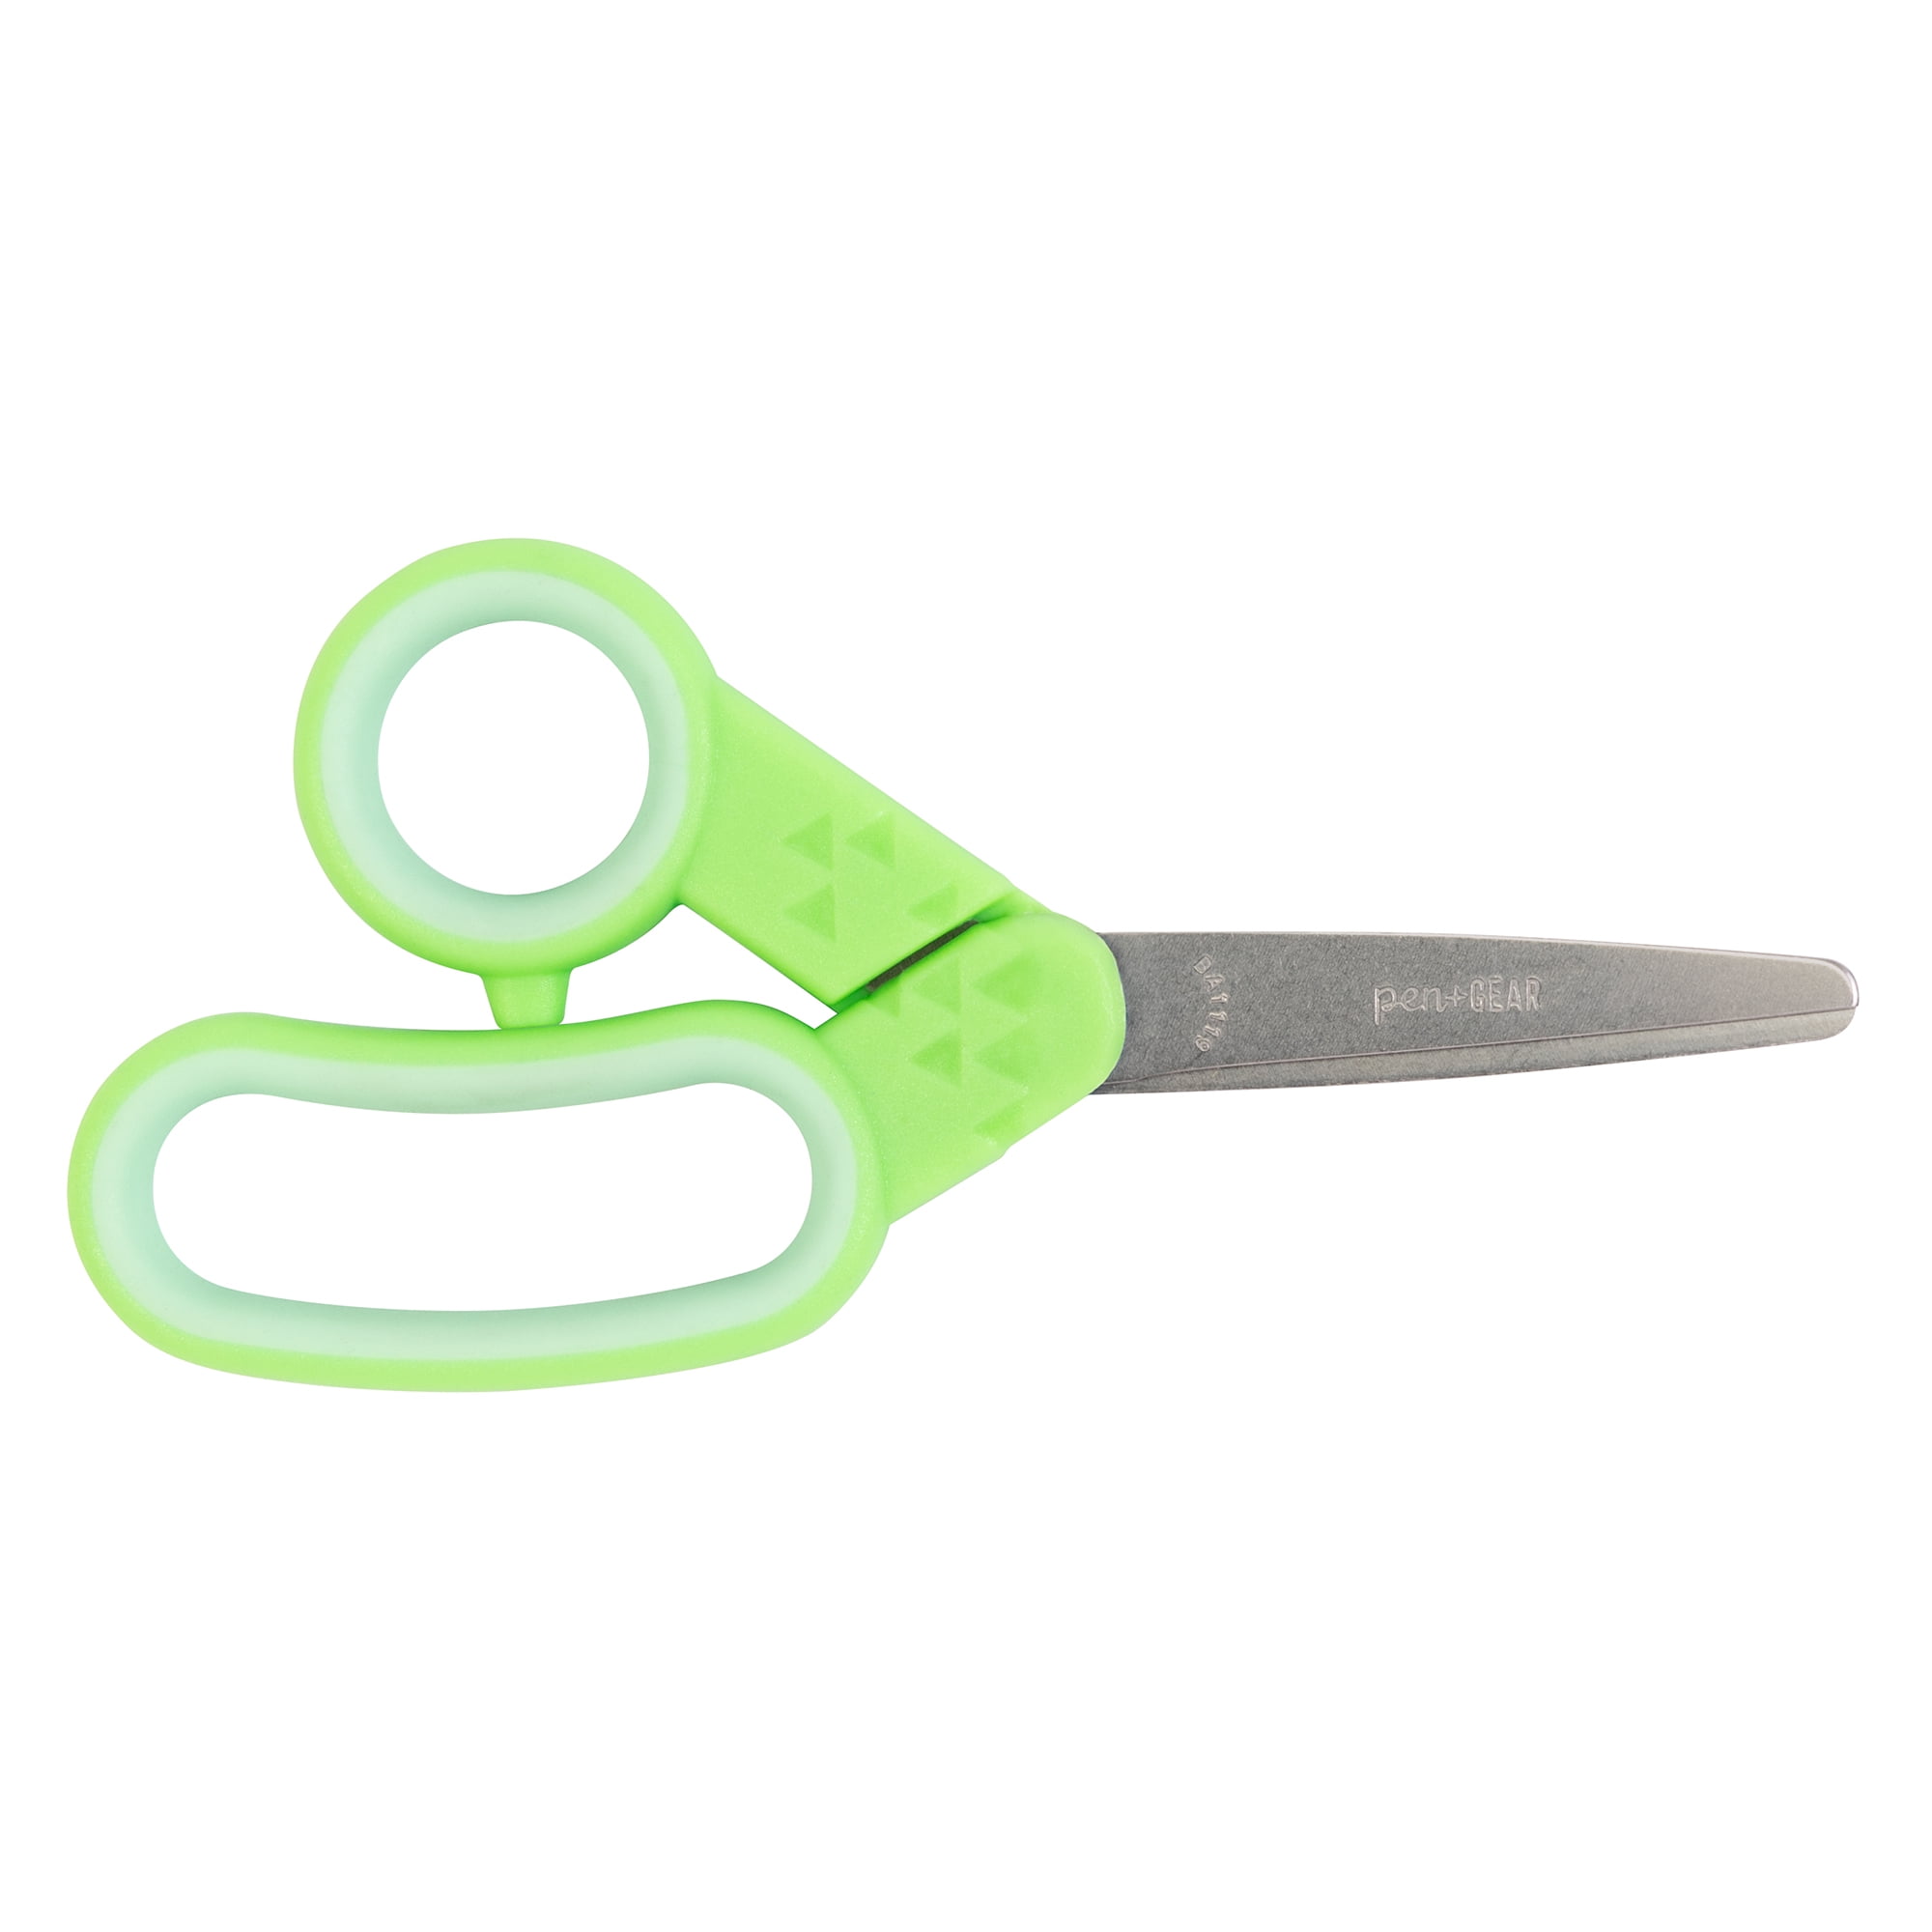 AED HS74210 Hystero-Pro Rotatable Blunt Tip Scissors, 5FR x 40cm, S/A